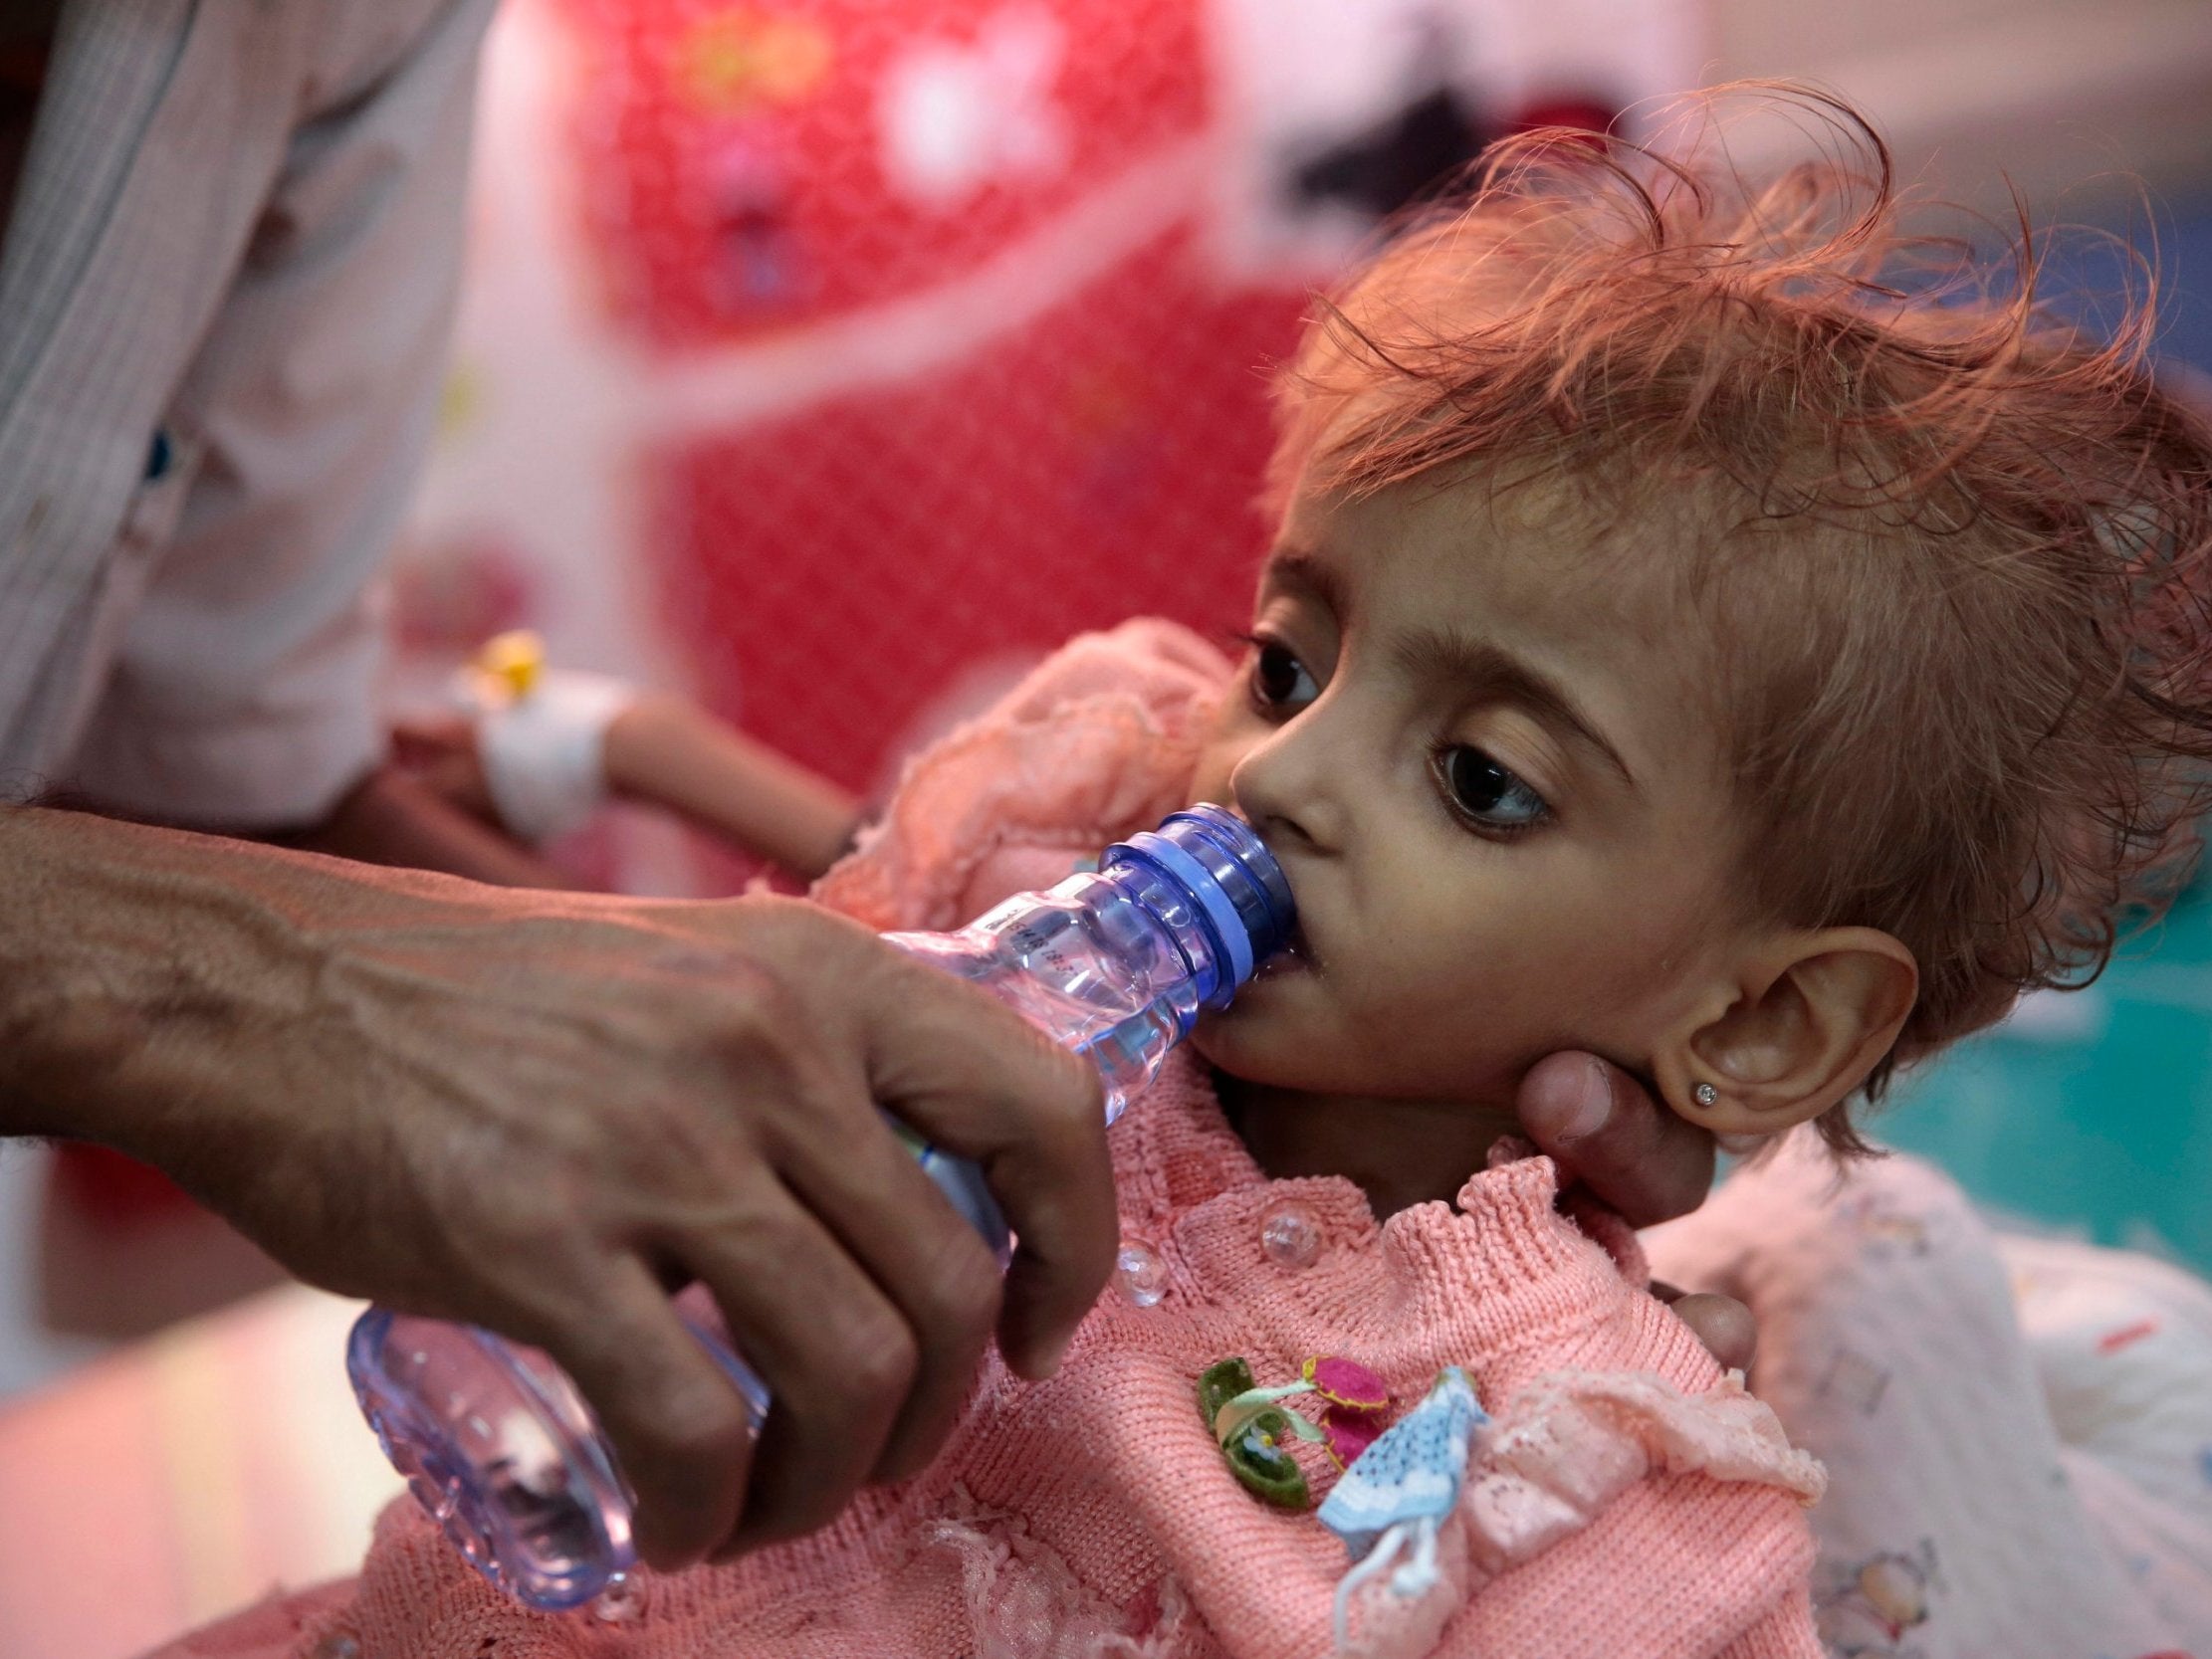 A father gives water to his malnourished daughter at a feeding centre in a hospital in Hodeidah, Yemen